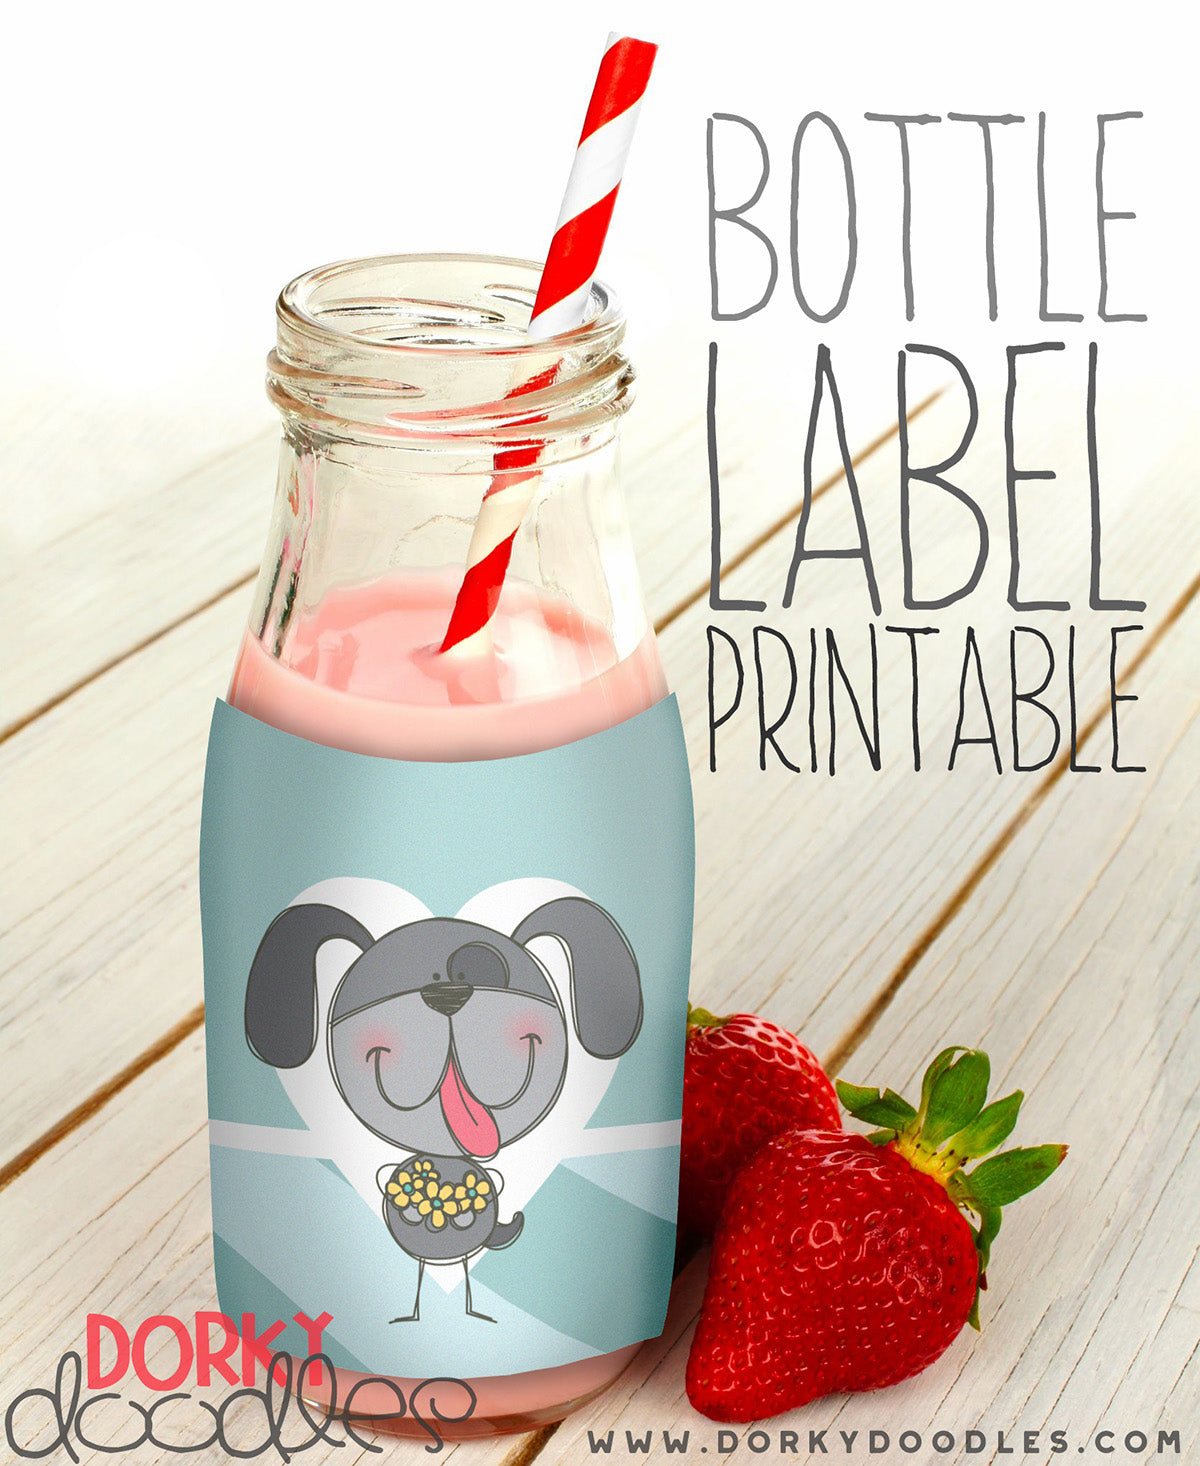 free printable bottle label with puppy